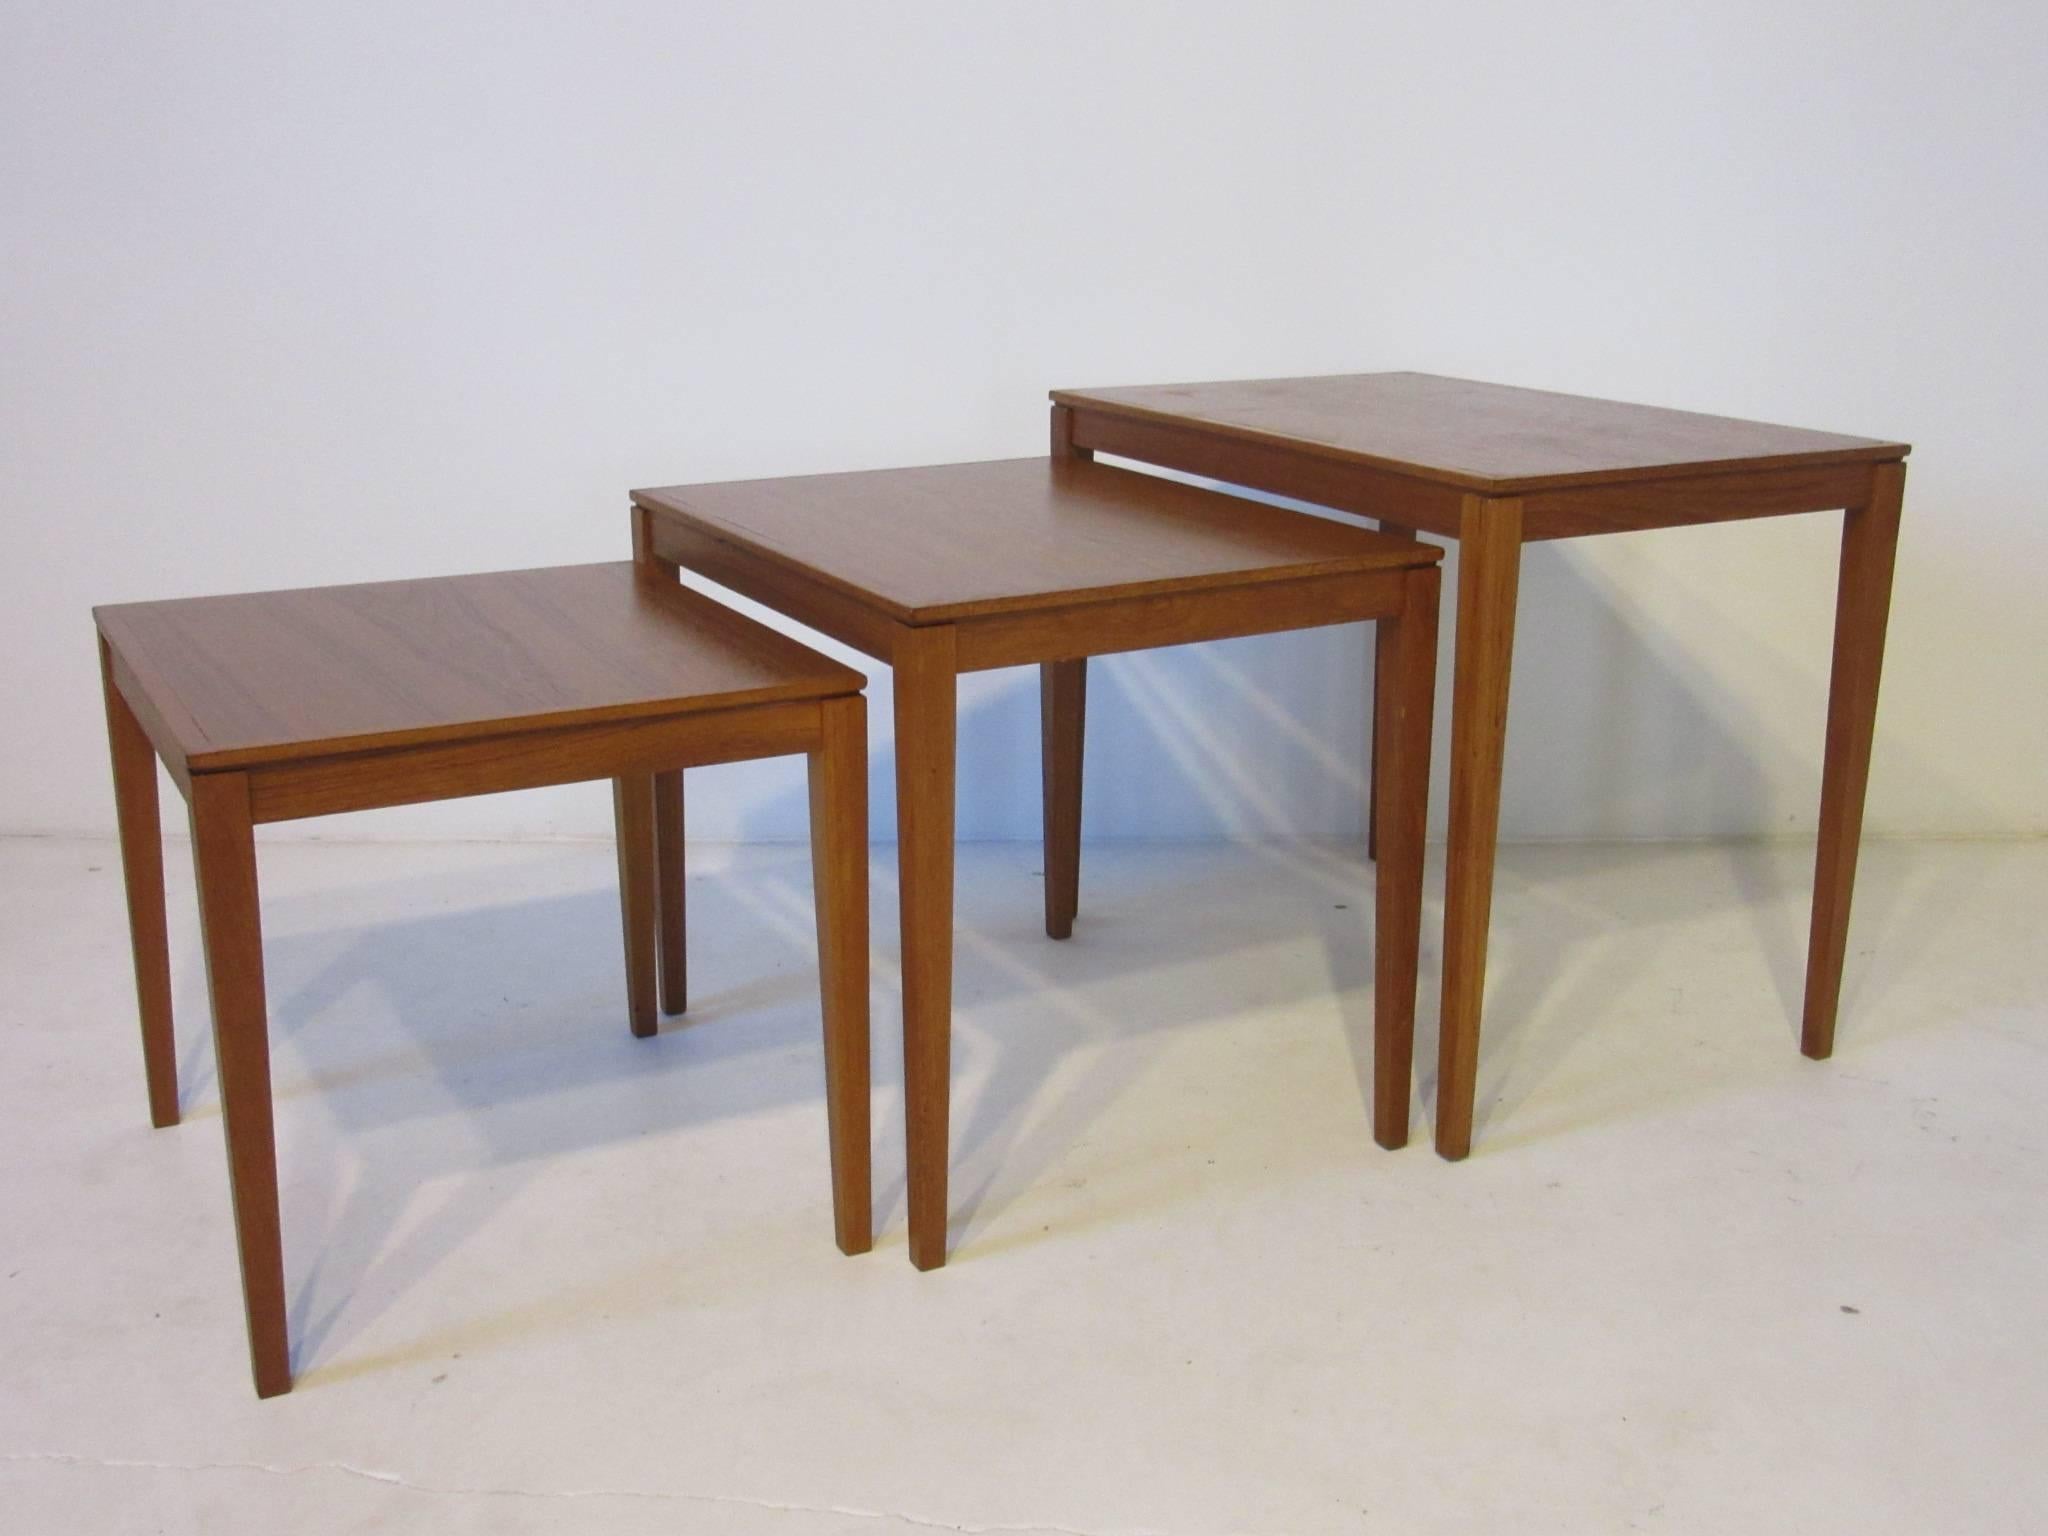 A set of three teak wood nesting tables with well grained tops and tapering legs, made in Denmark and designed by Bent Silberg Mobler. The outer table size is listed below, the inner table measurements are 20.5